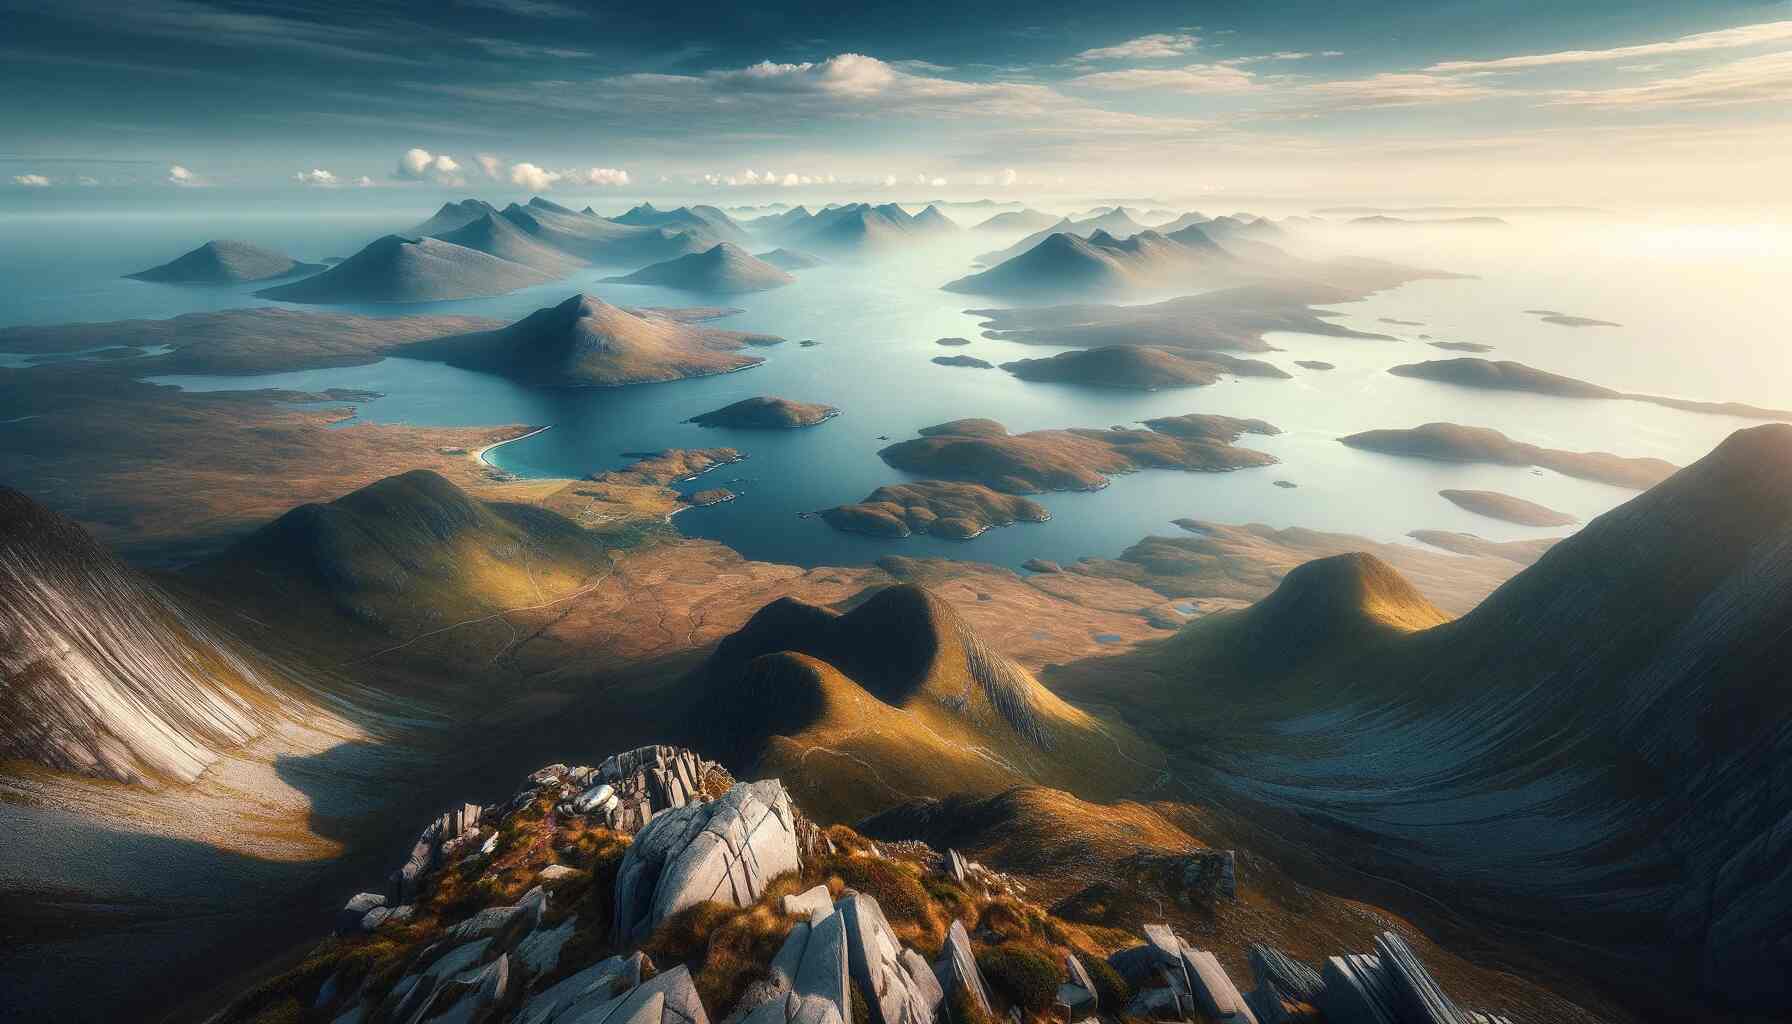 This image depicts the panoramic view from the summit of Diamond Hill in Connemara National Park, Galway, Ireland, highlighting the Twelve Bens mountain range, the Atlantic Ocean, and the nearby islands.